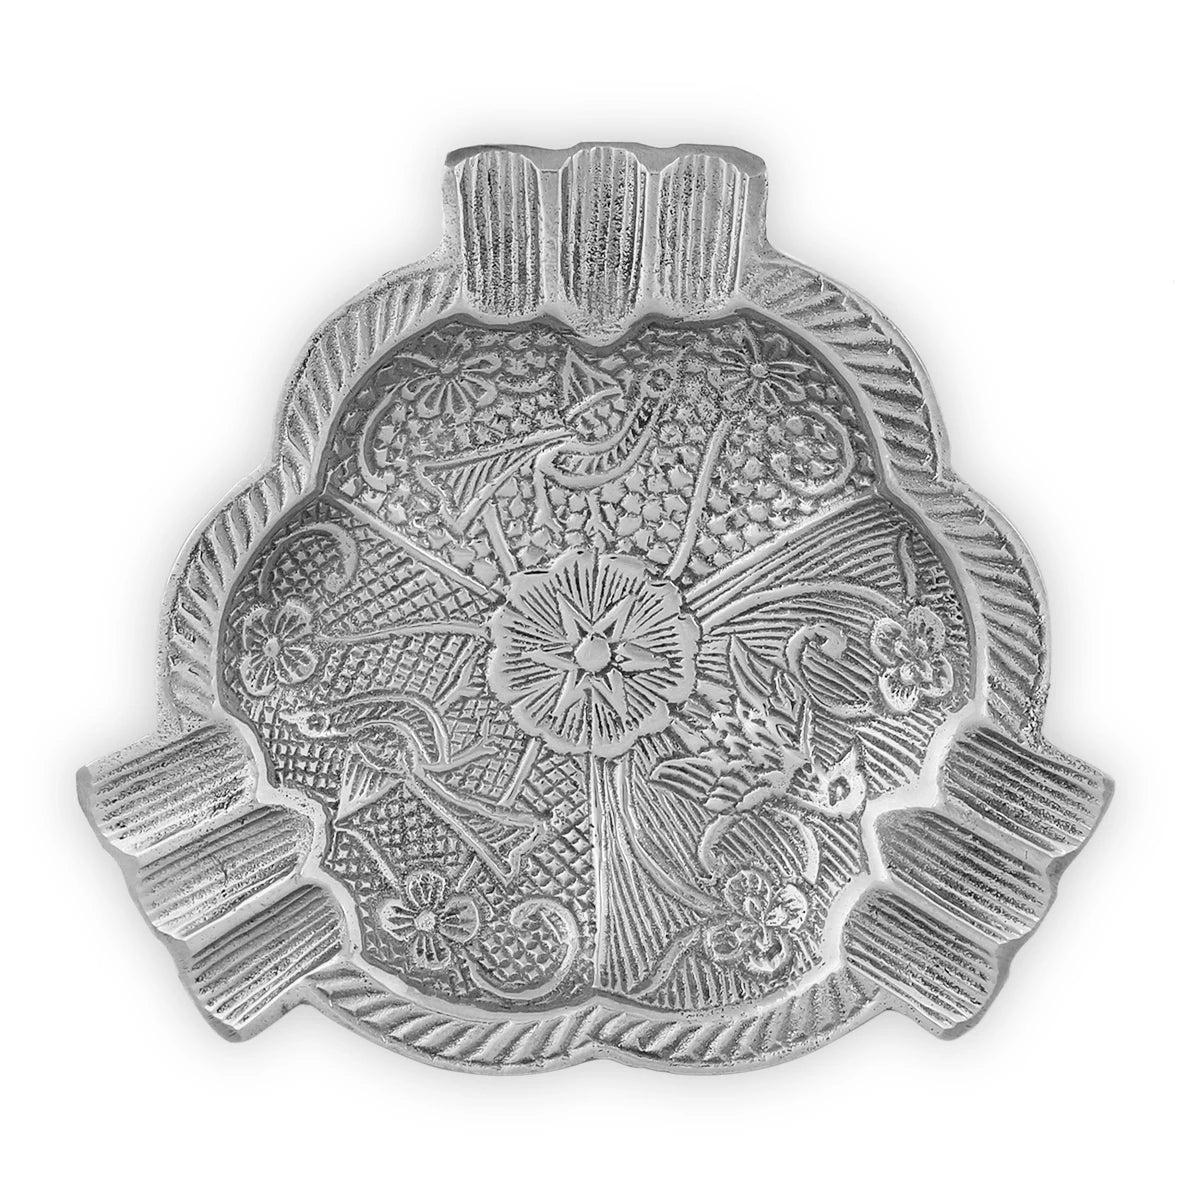 Top View of Flowery Engraved Silver Colored Brass Metal Ashtray